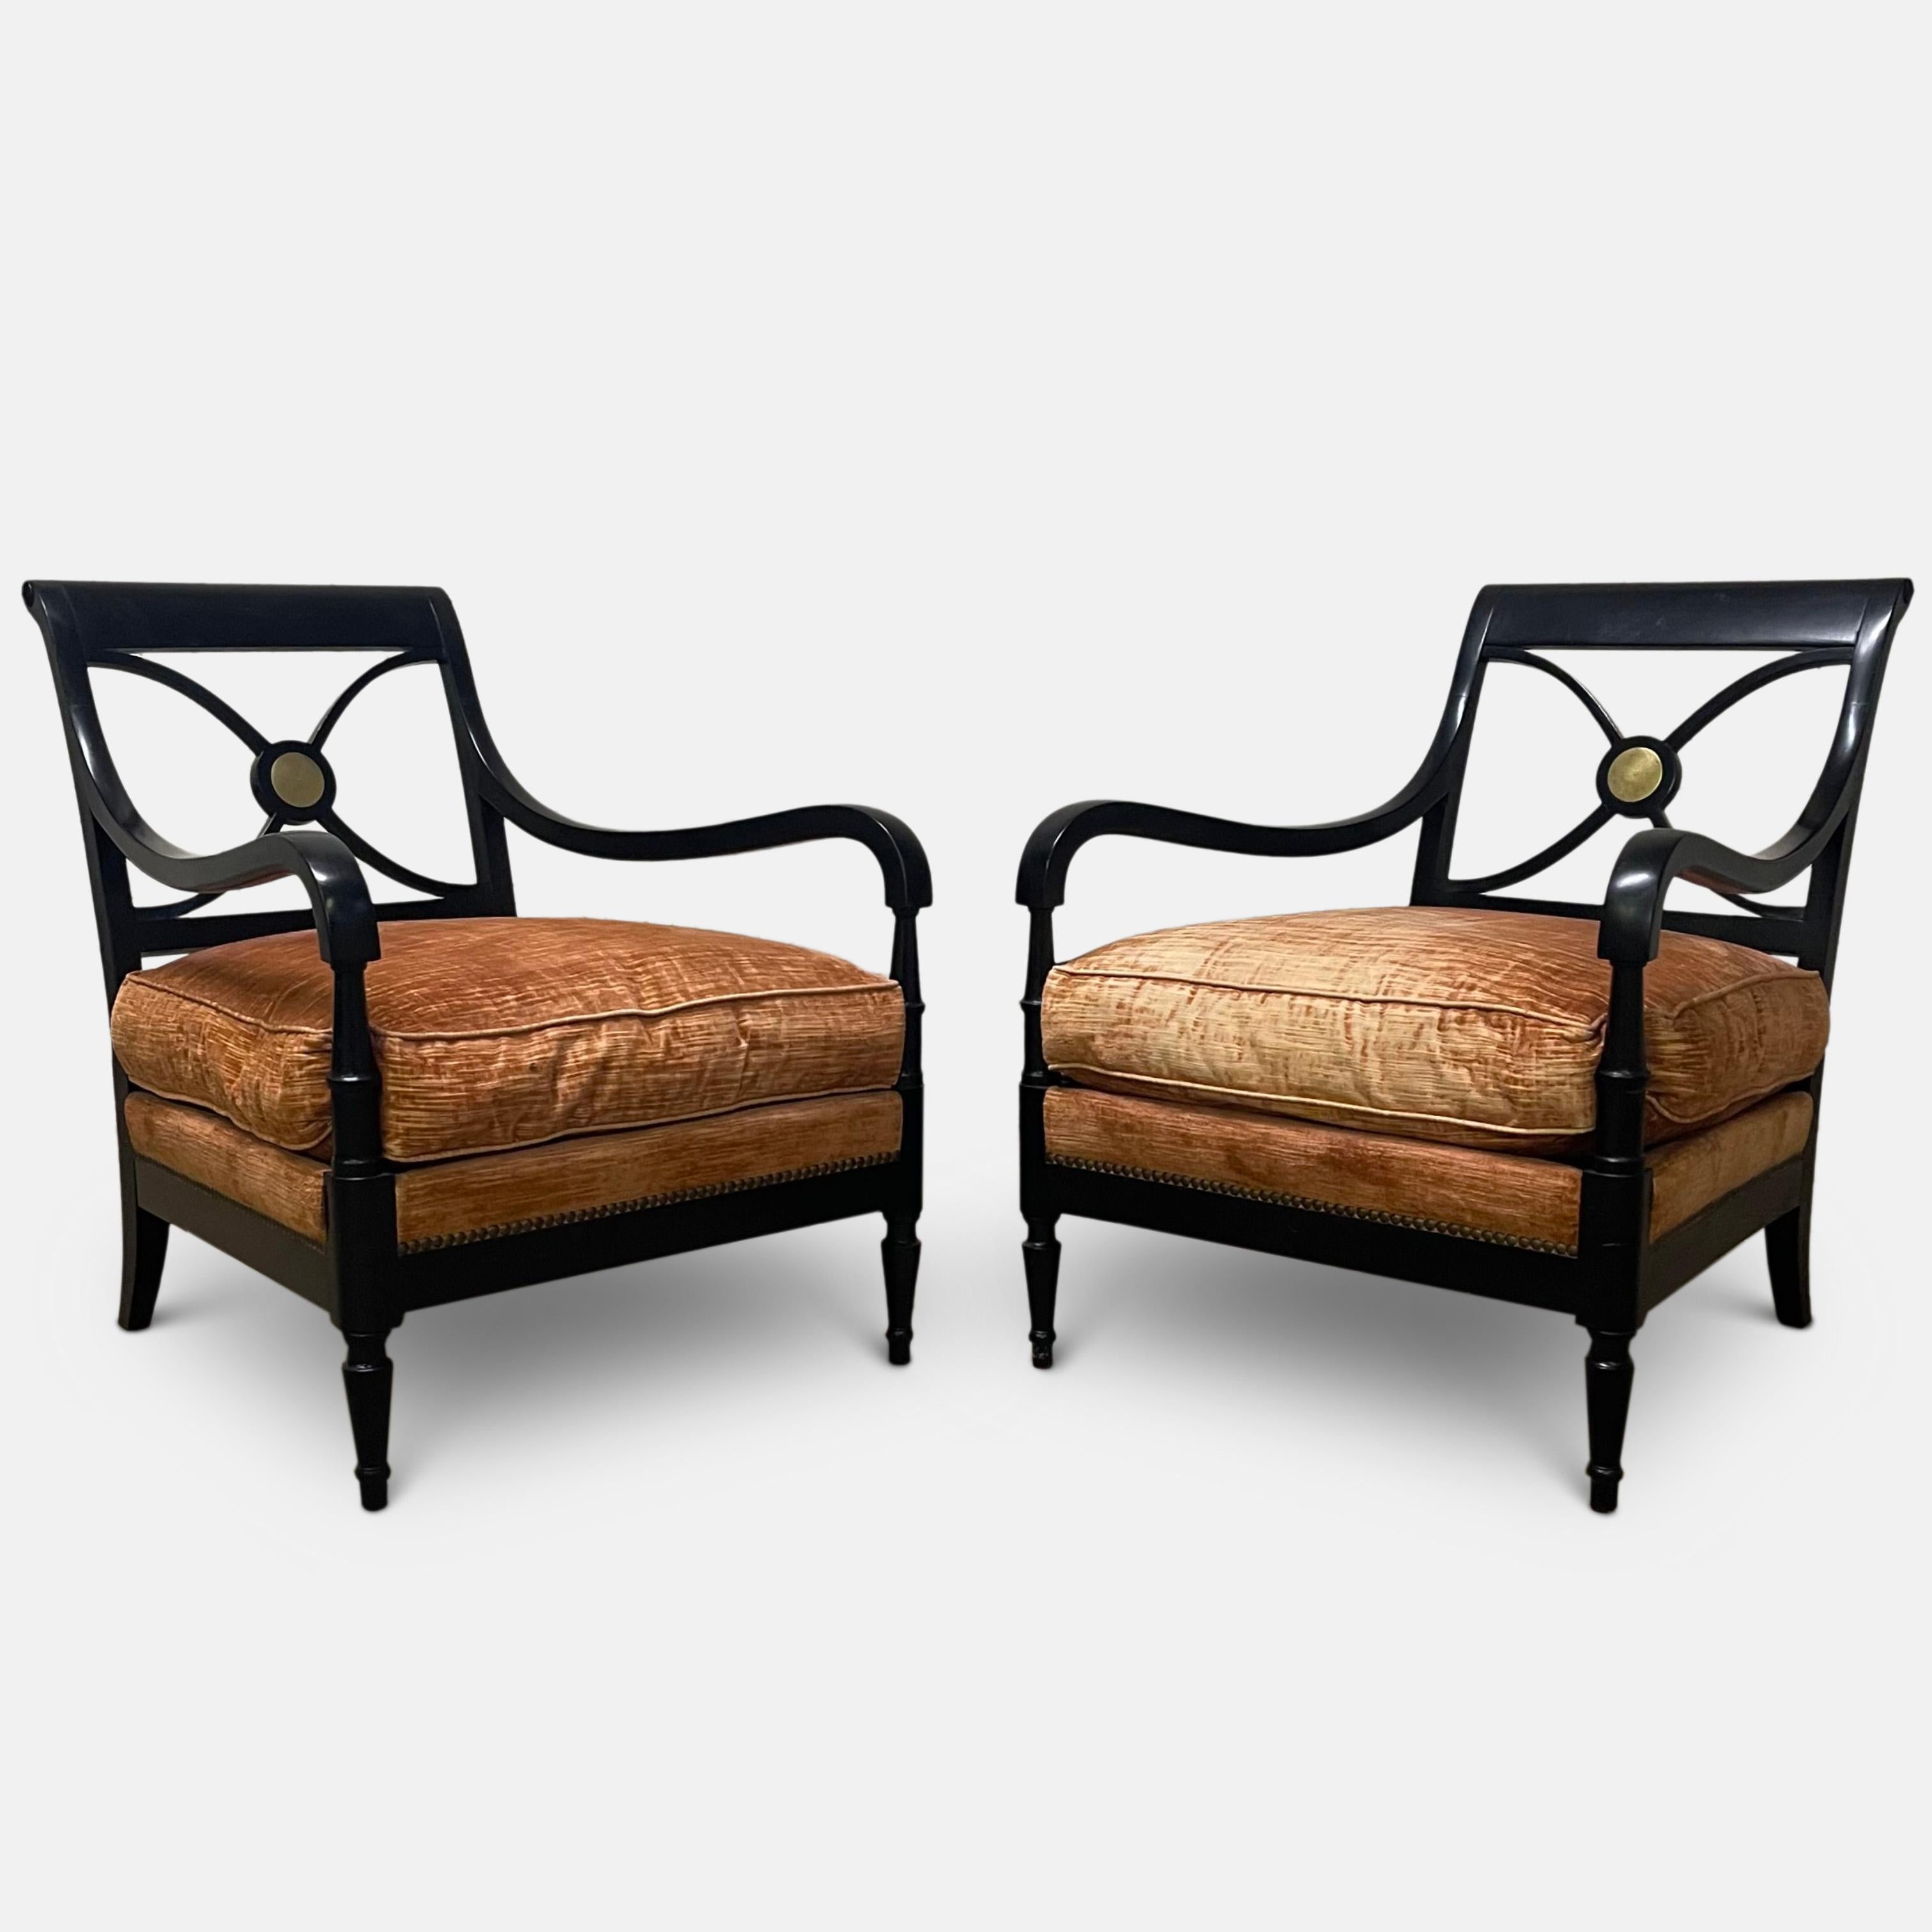 Pair of Ebonised Chairs by Maison Jansen, circa 1940 For Sale 1